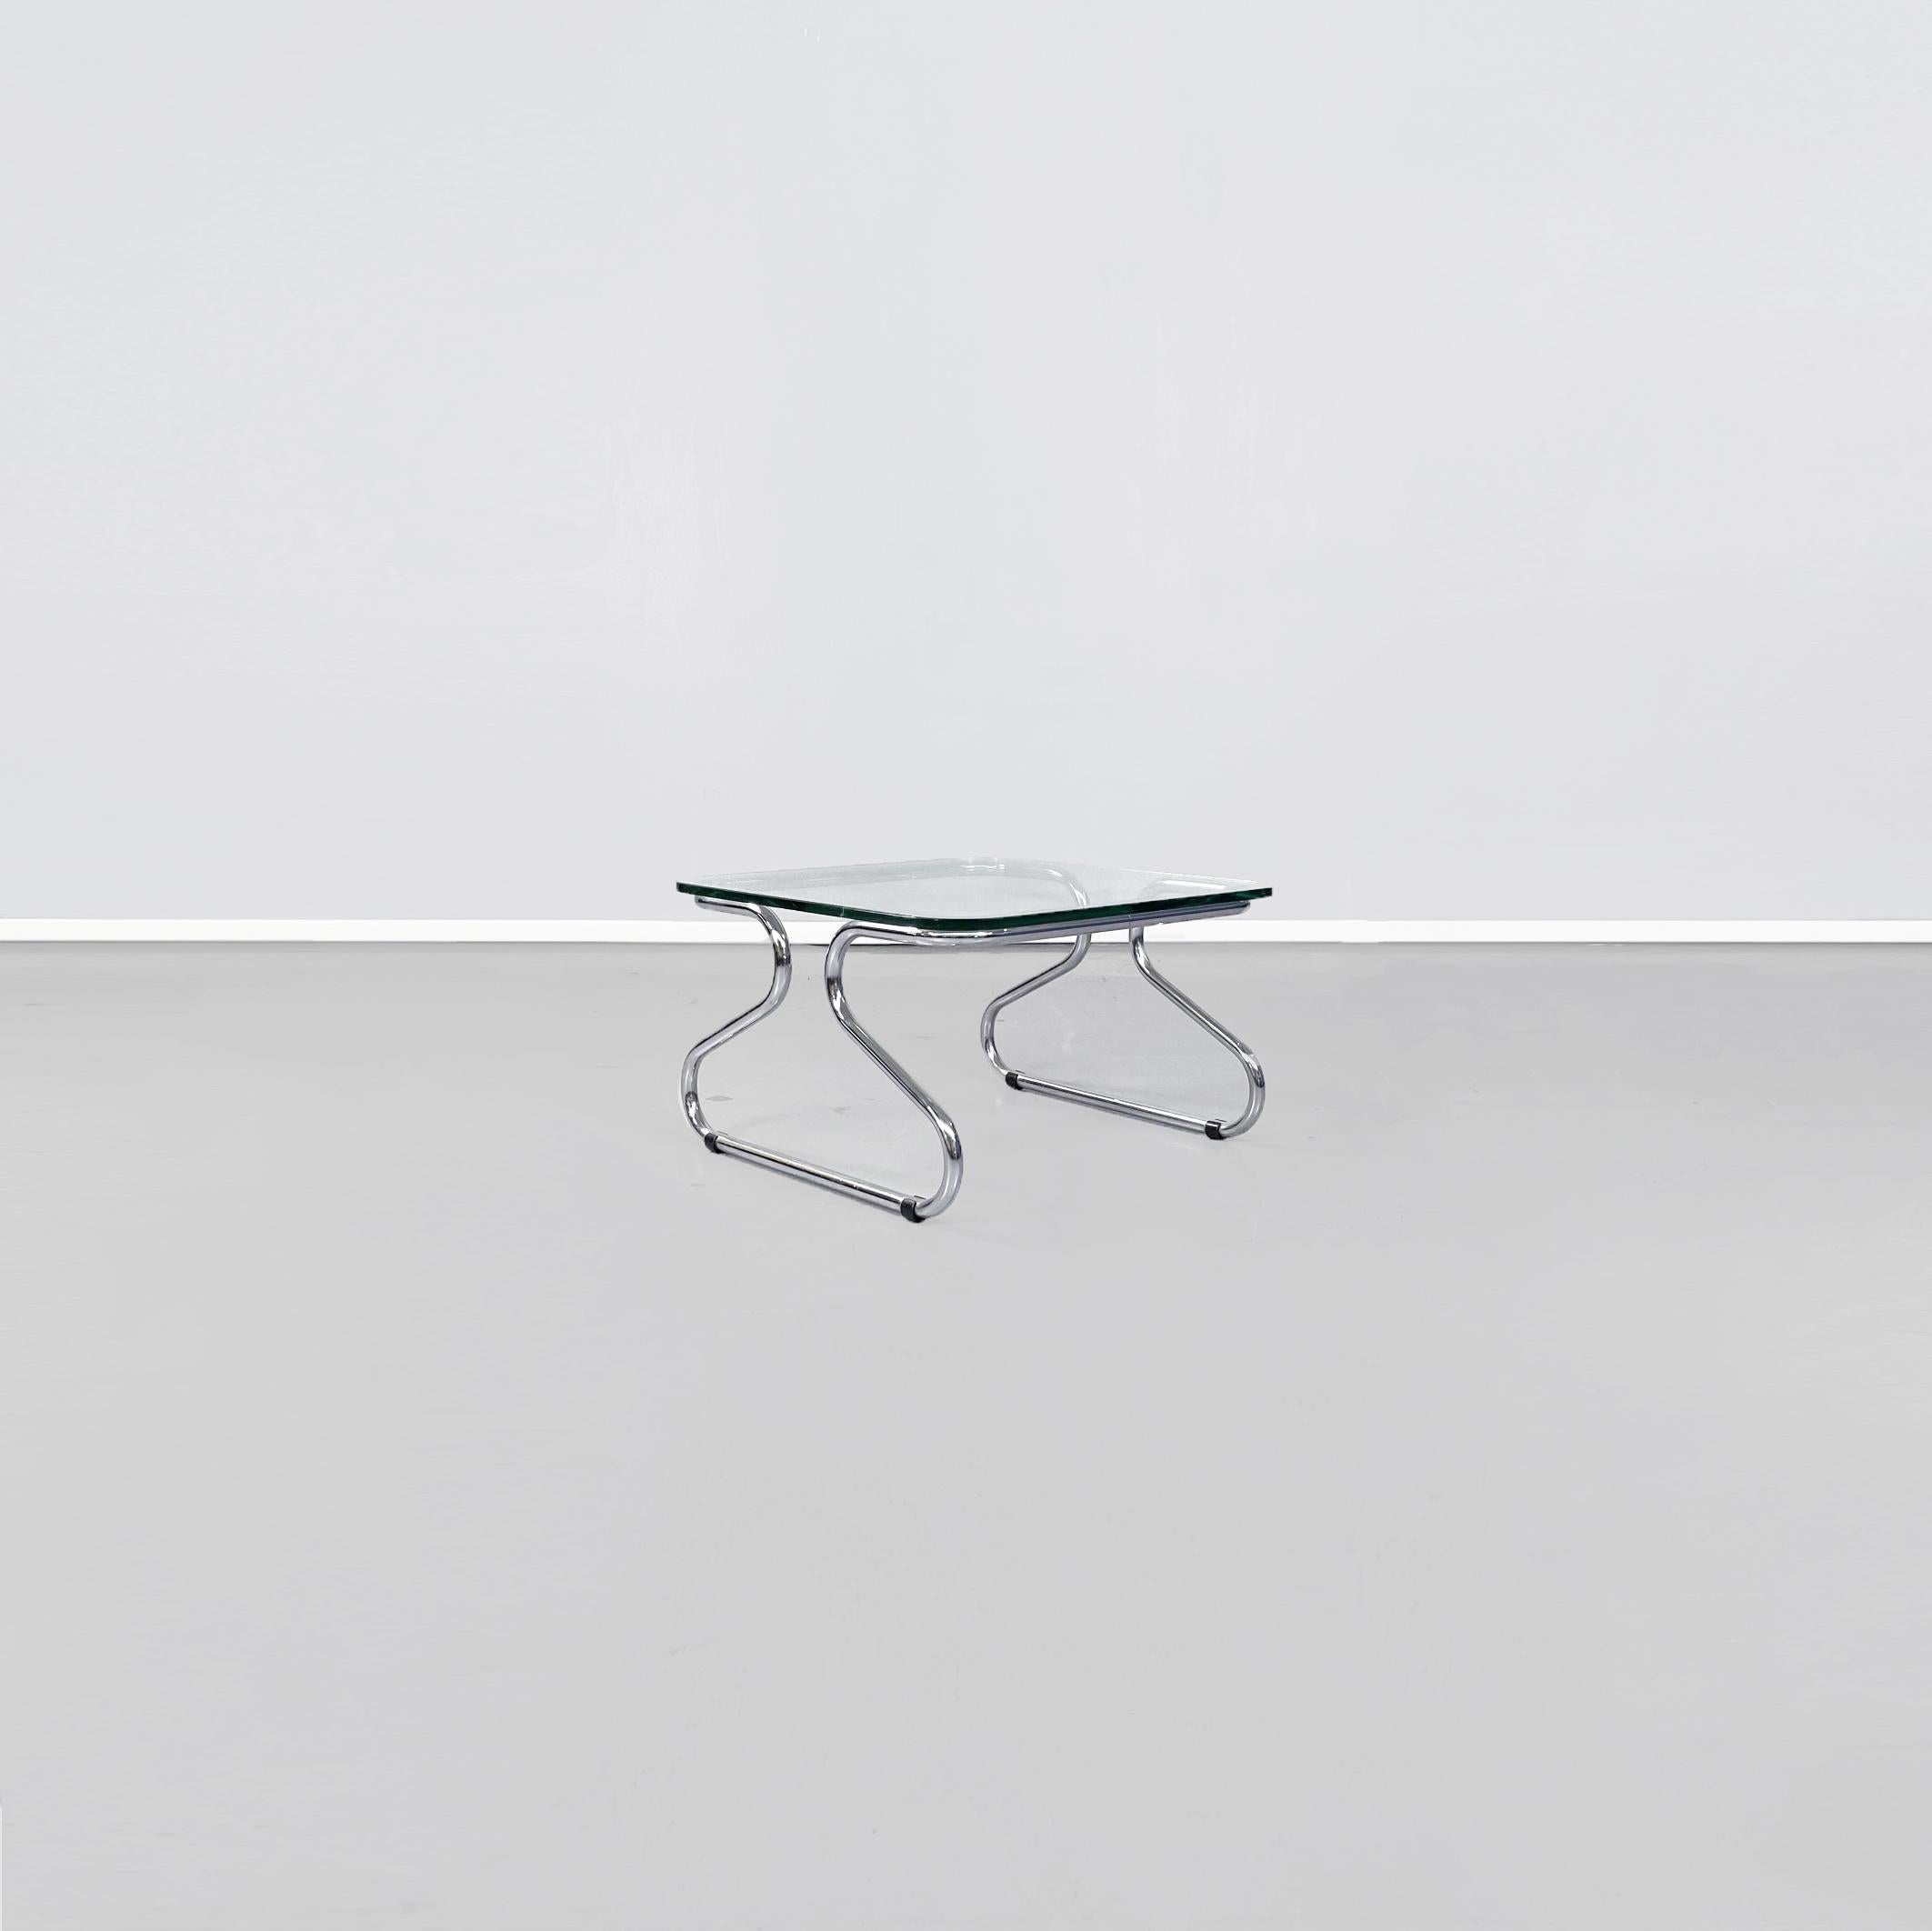 Italian mid-century coffee table in glass and steel, 1970s.
Coffee table with steel structure and leaning glass top.
1970's.

Very good condition

Measurements: 62.5 x 80 x 40.5 H cm.